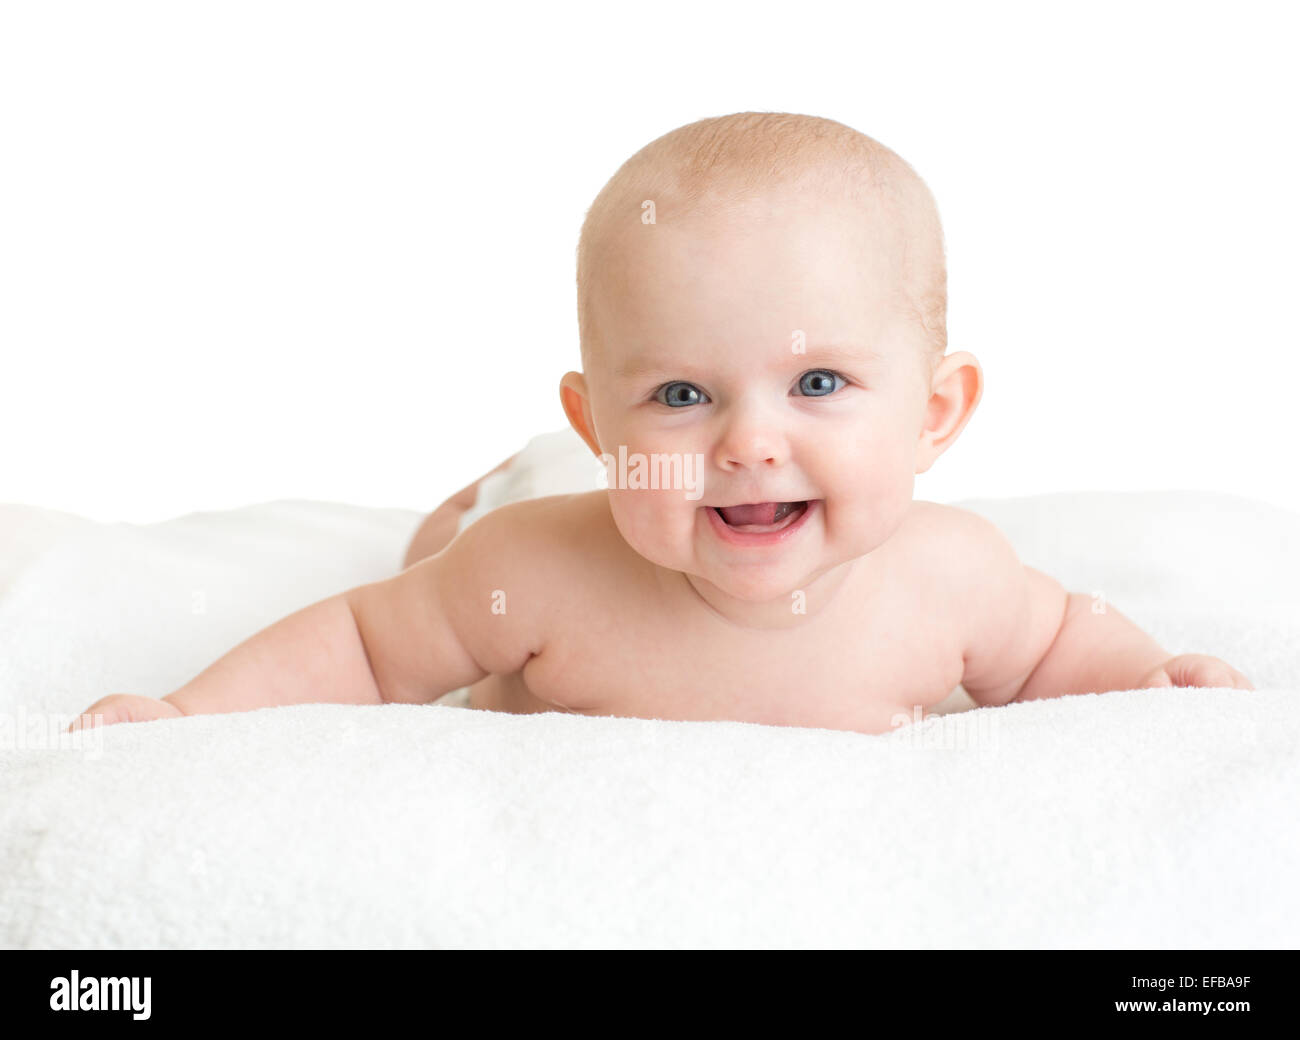 Cute smiling baby lying on serviette blanche Banque D'Images